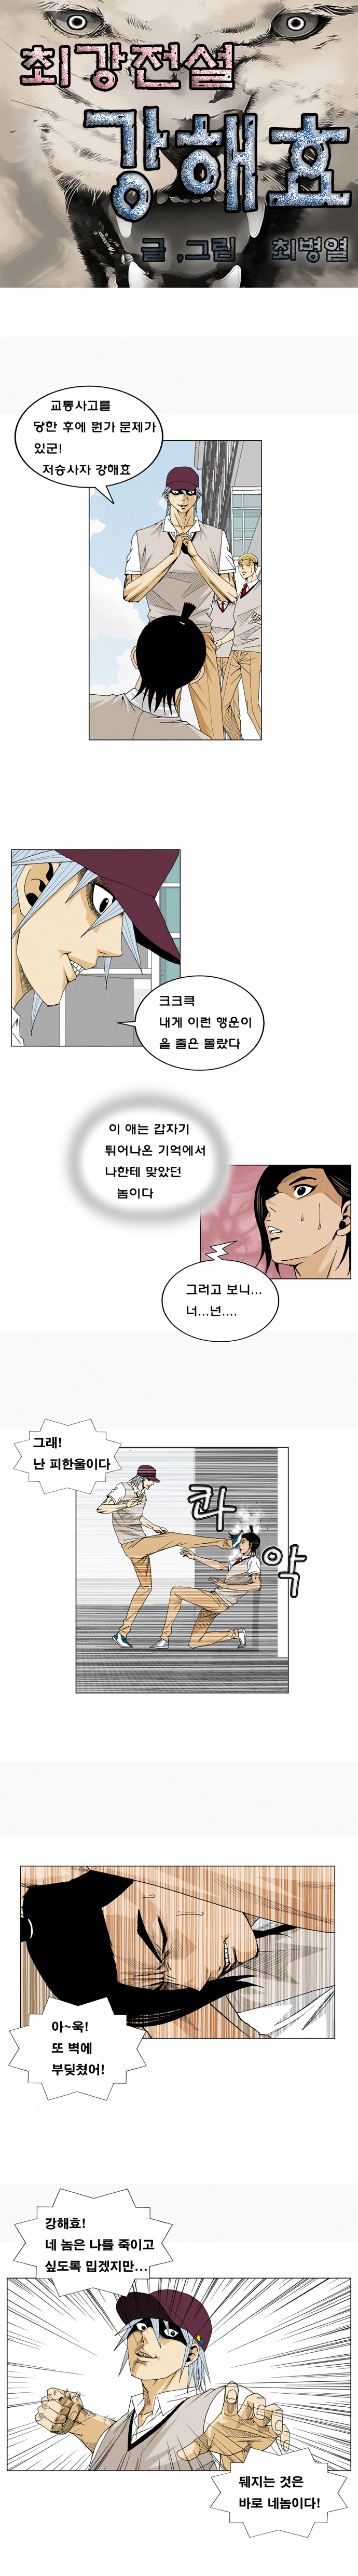 Ultimate Legend - Kang Hae Hyo - Chapter 14 - Page 2